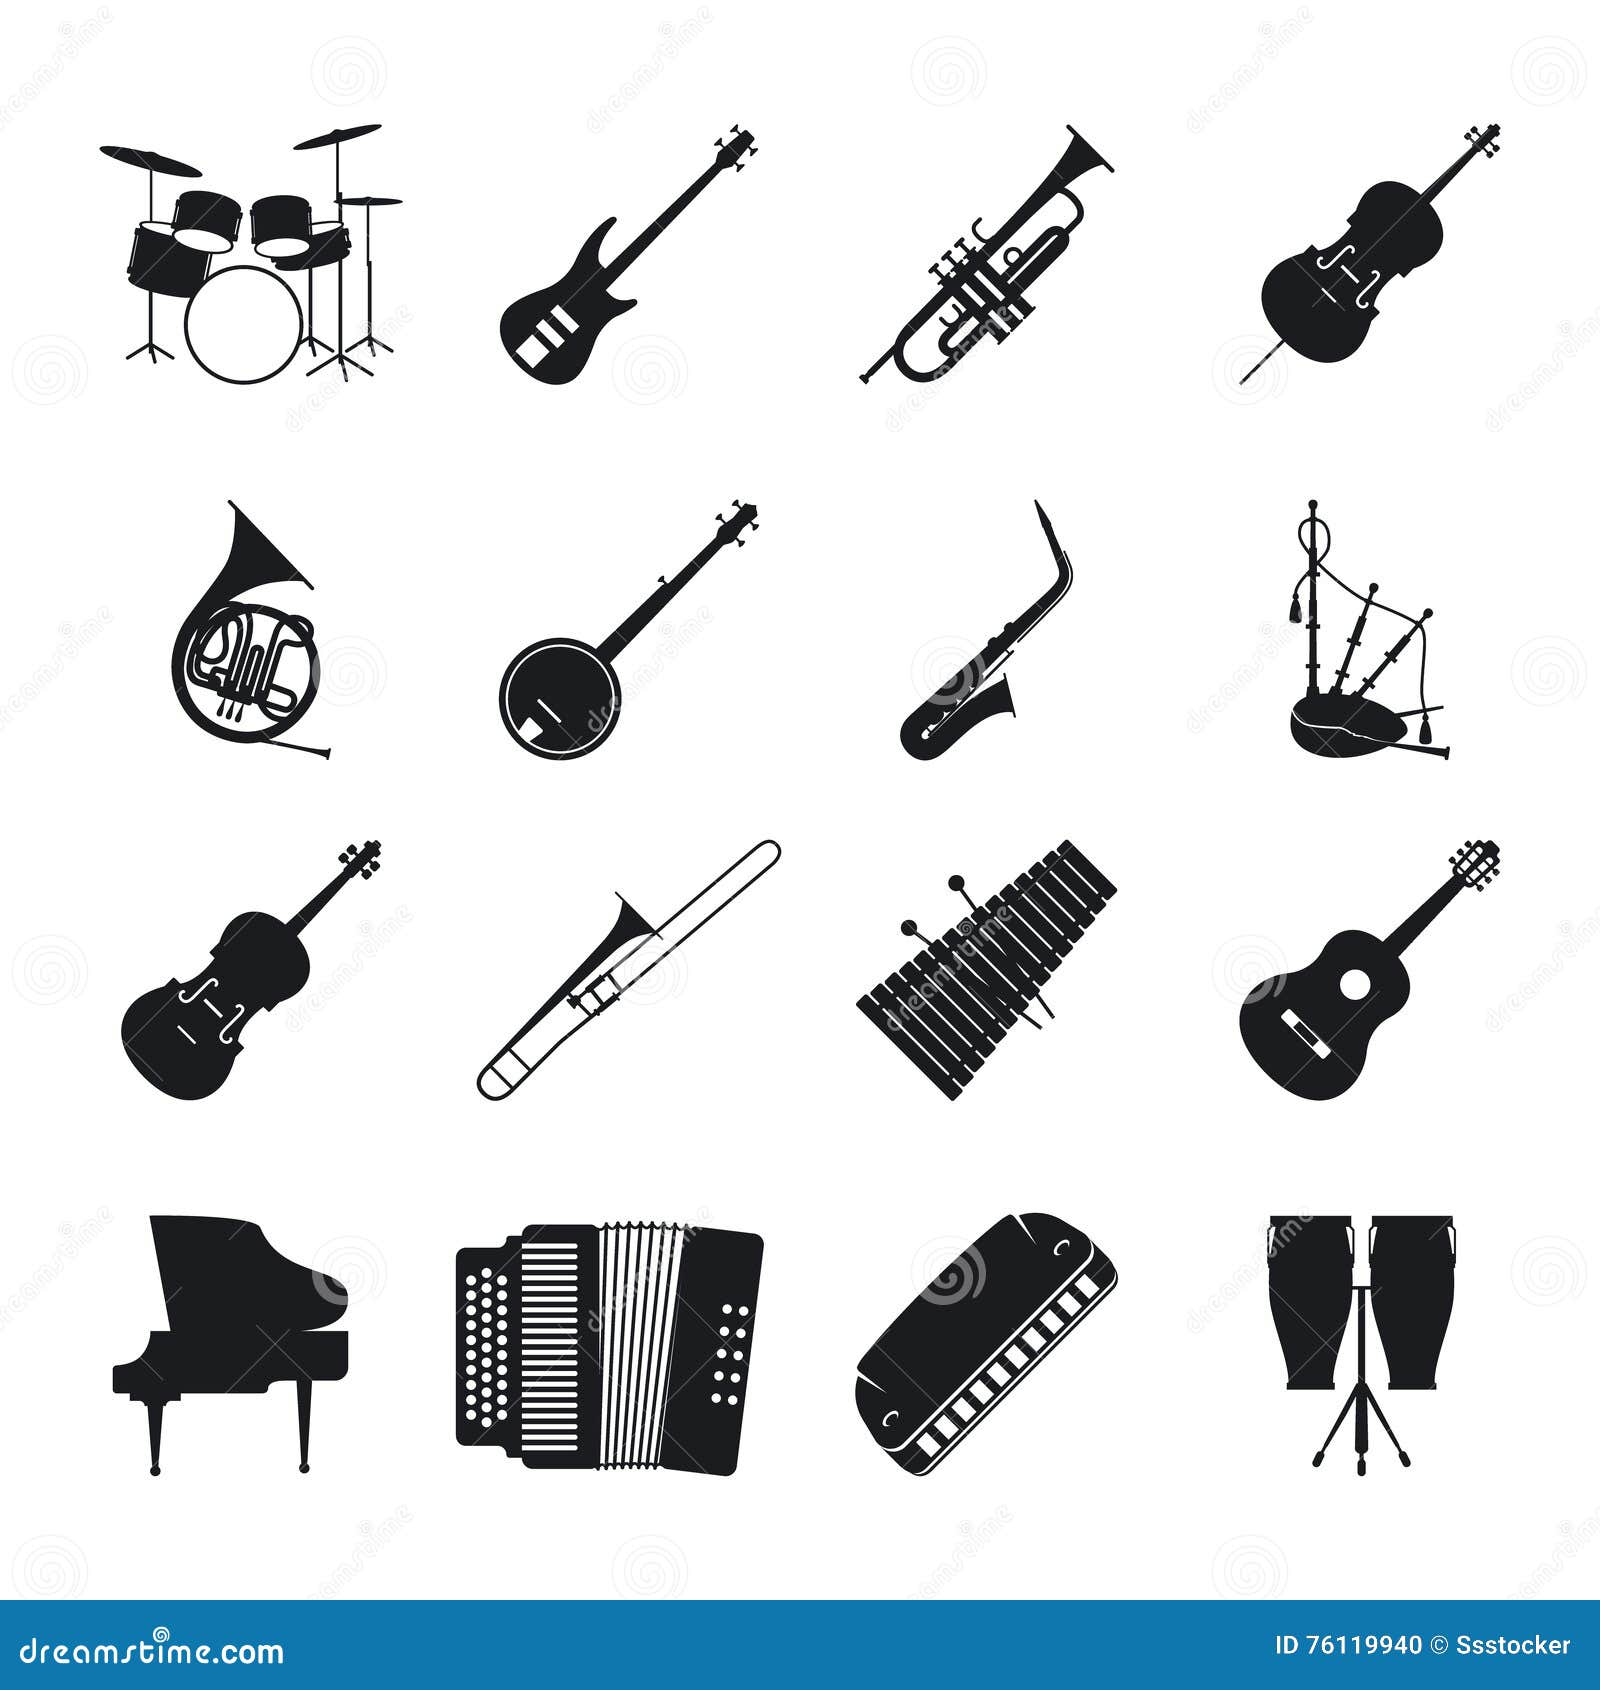 jazz musical instrument silhouettes